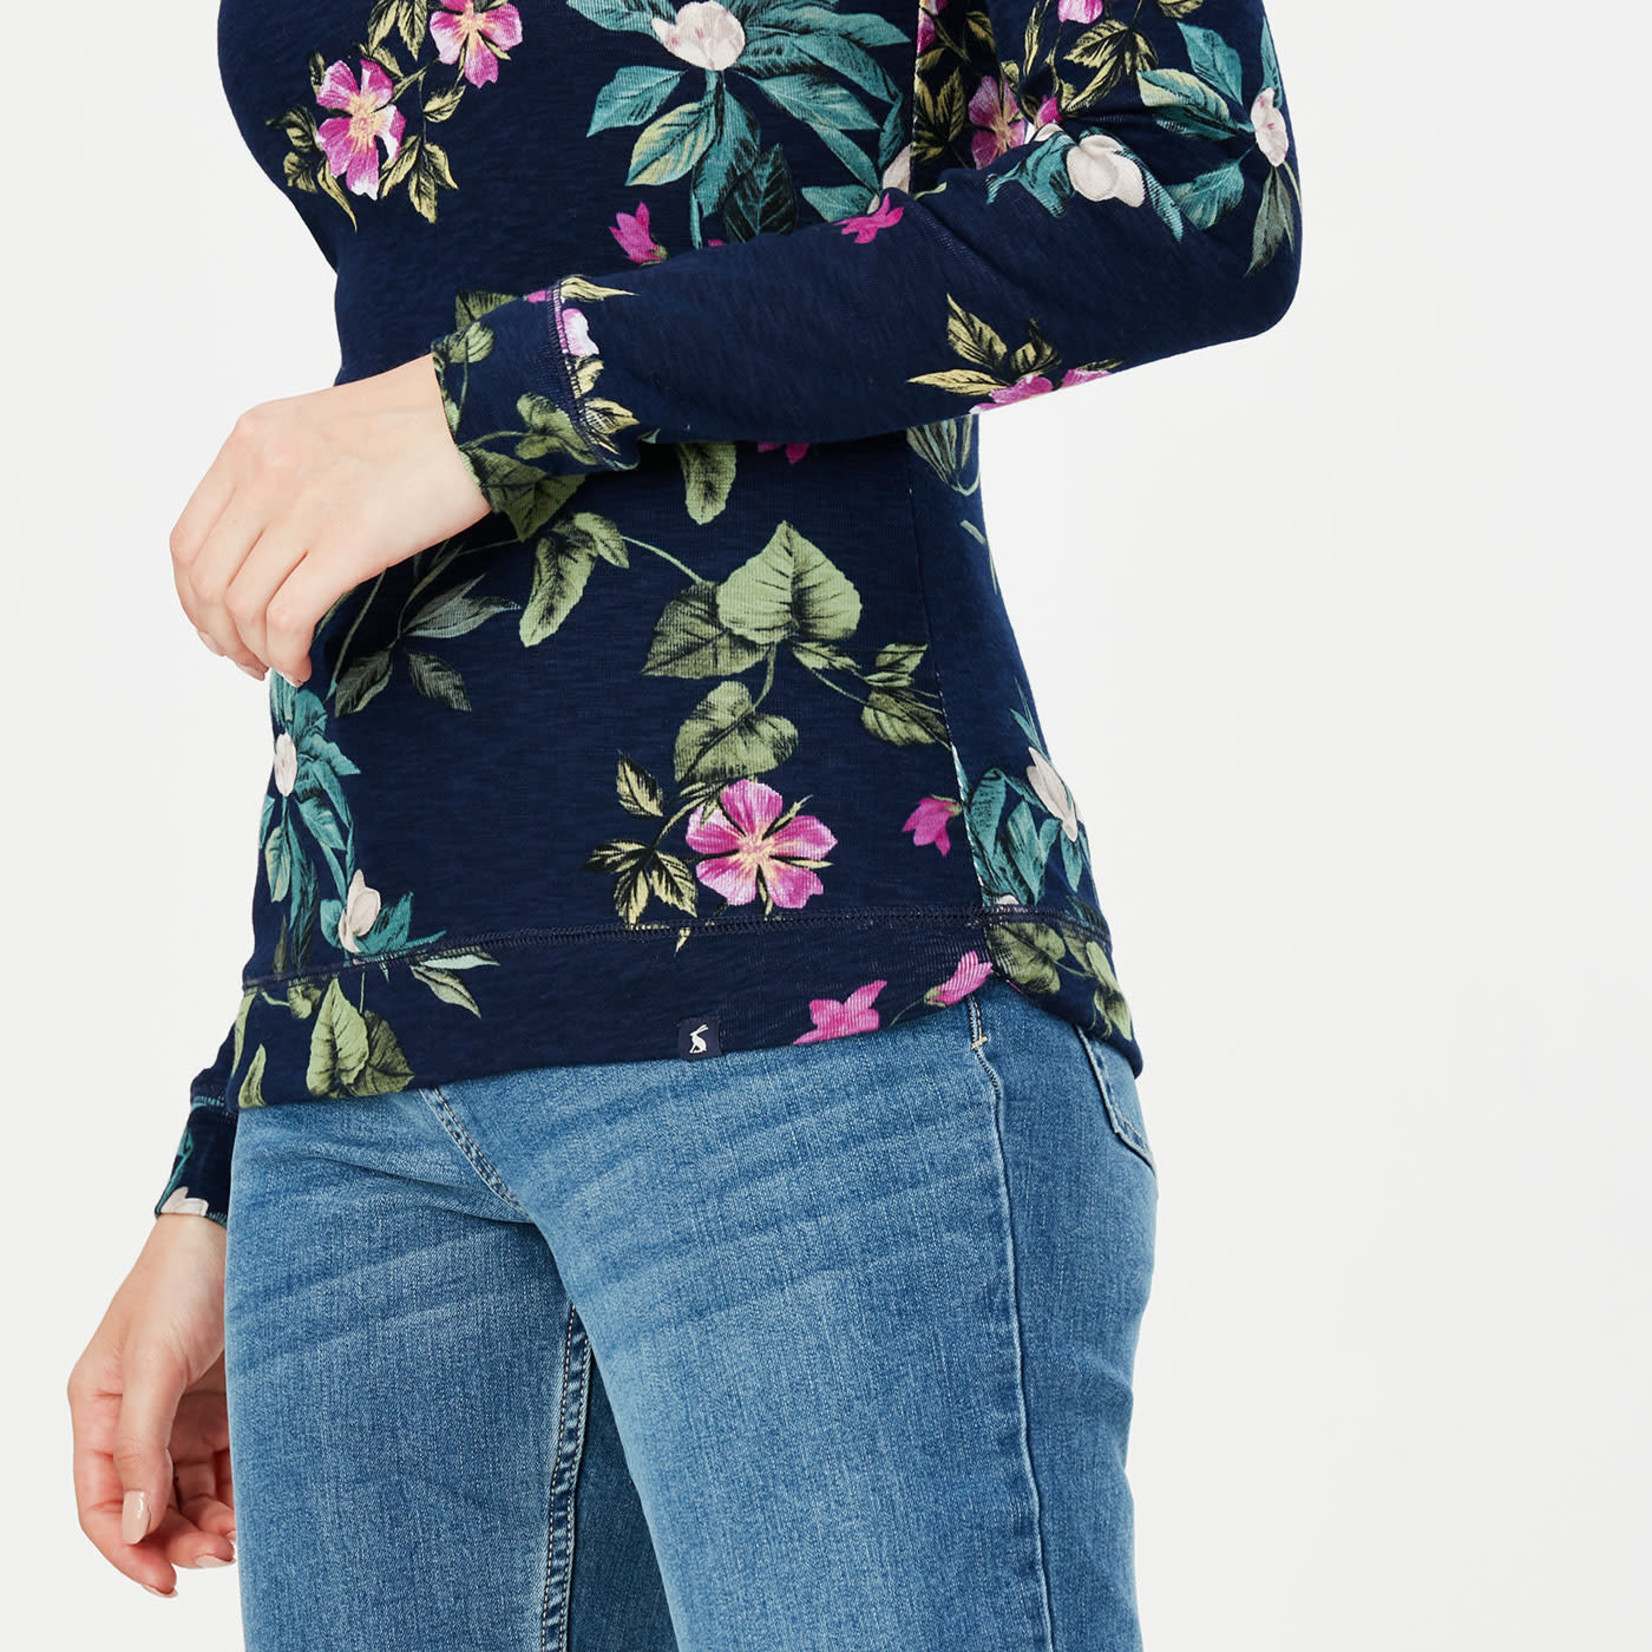 Joules for Women Marlston Navy Floral Sweatshirt